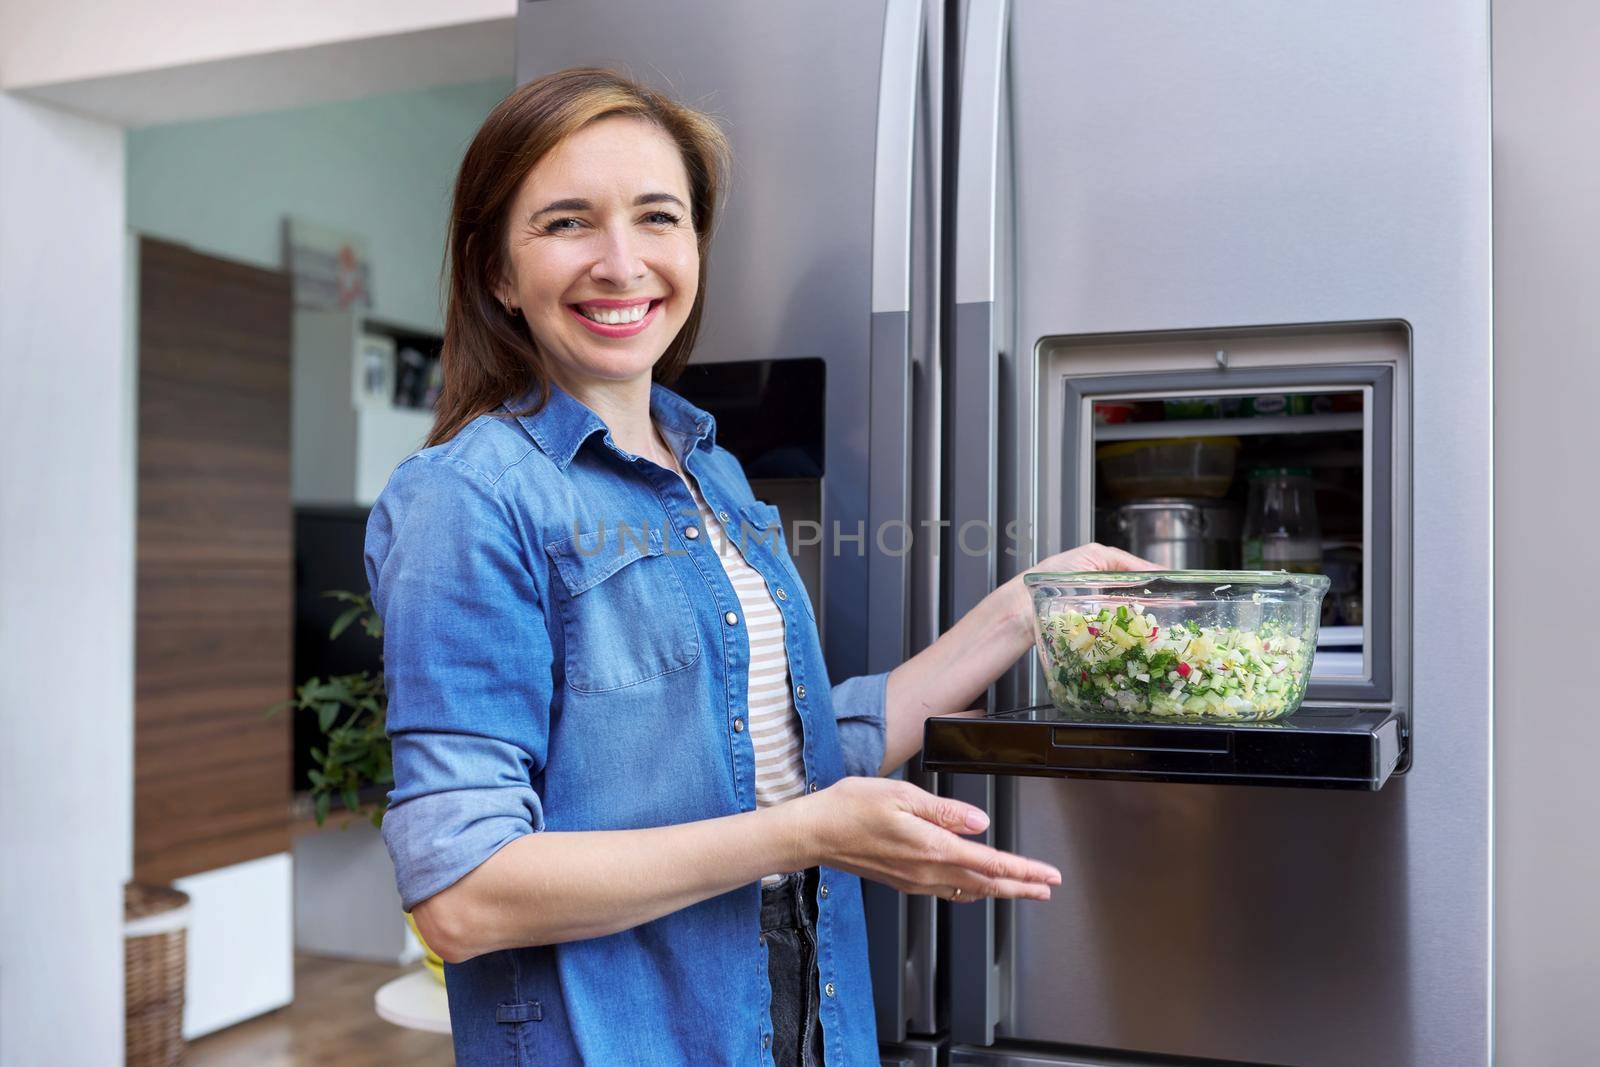 Woman with bowl of vegetable salad from refrigerator. Kitchen interior, open modern chrome refrigerator door background. Eating at home, lifestyle, household, dieting, healthly food concept